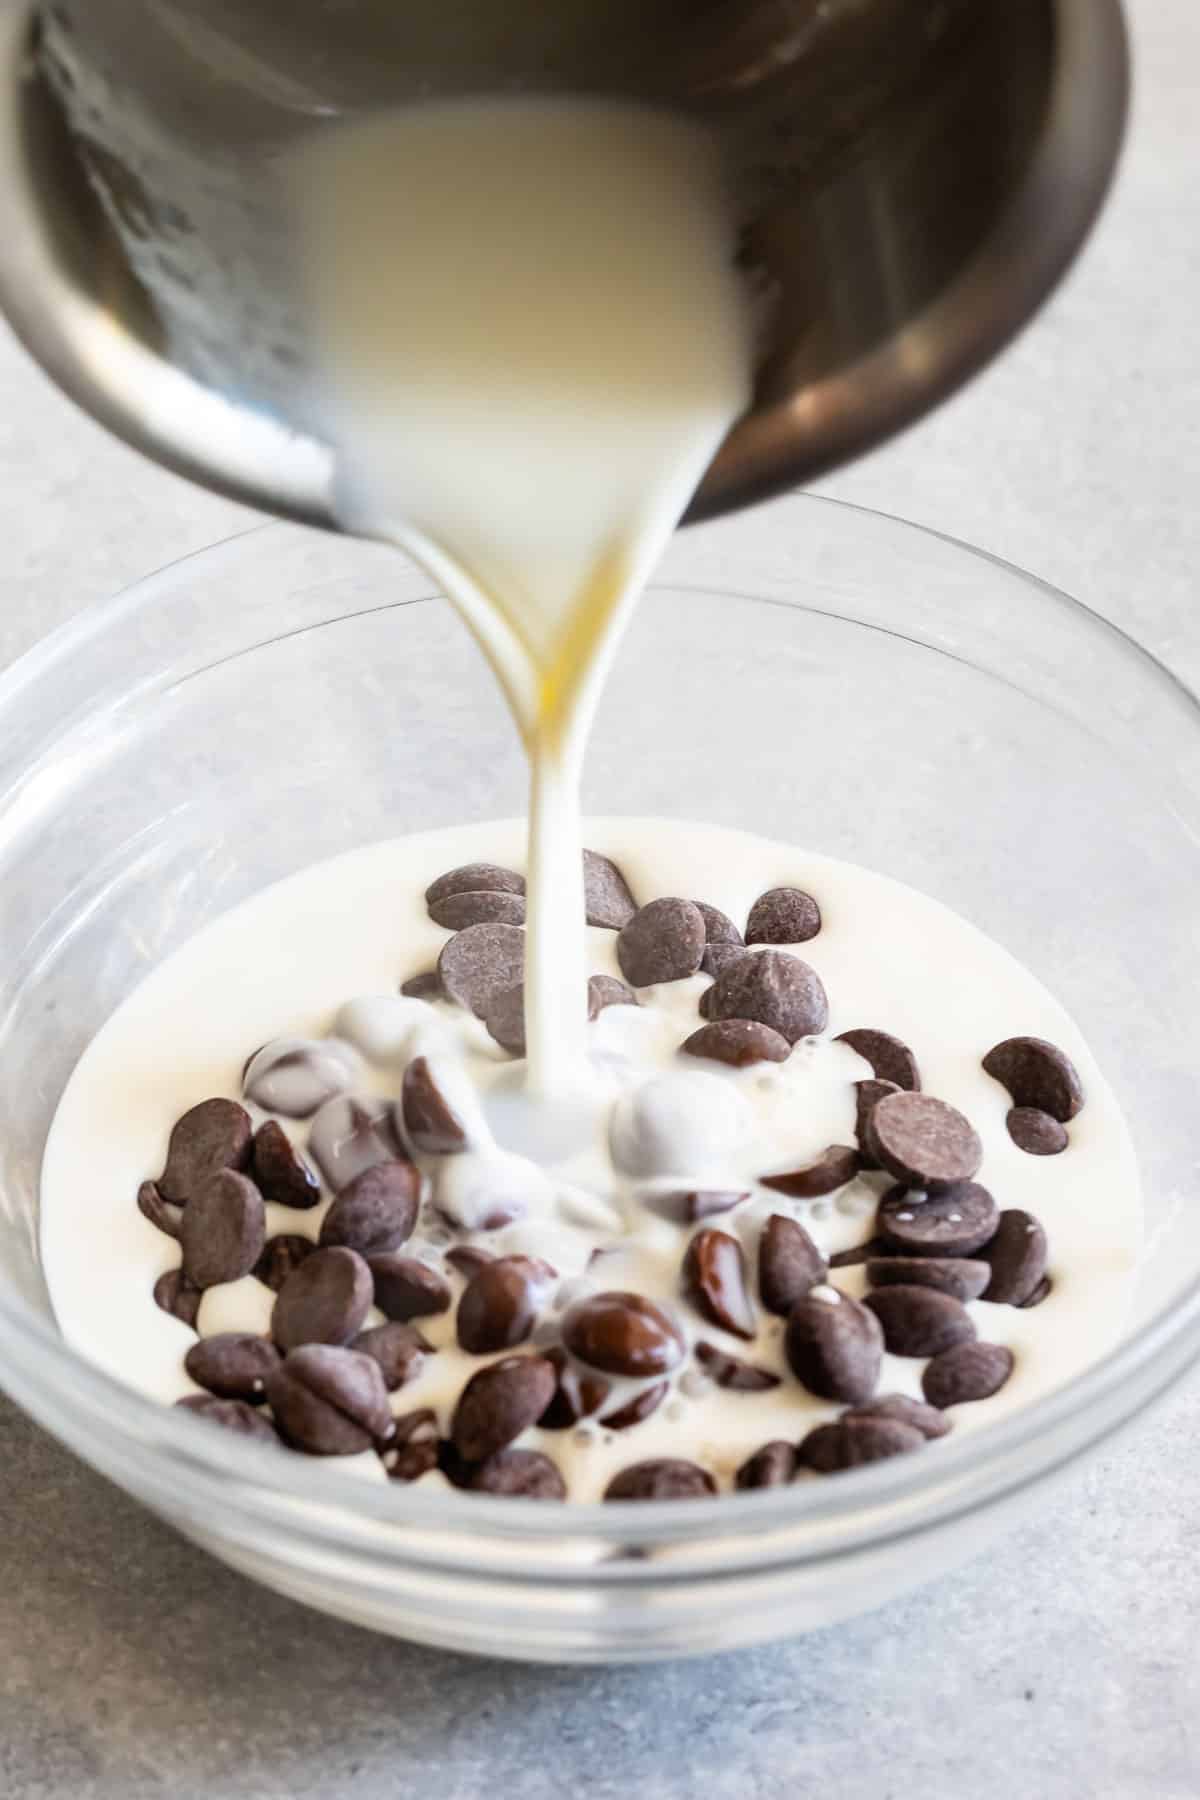 pouring cream onto chocolate chips.